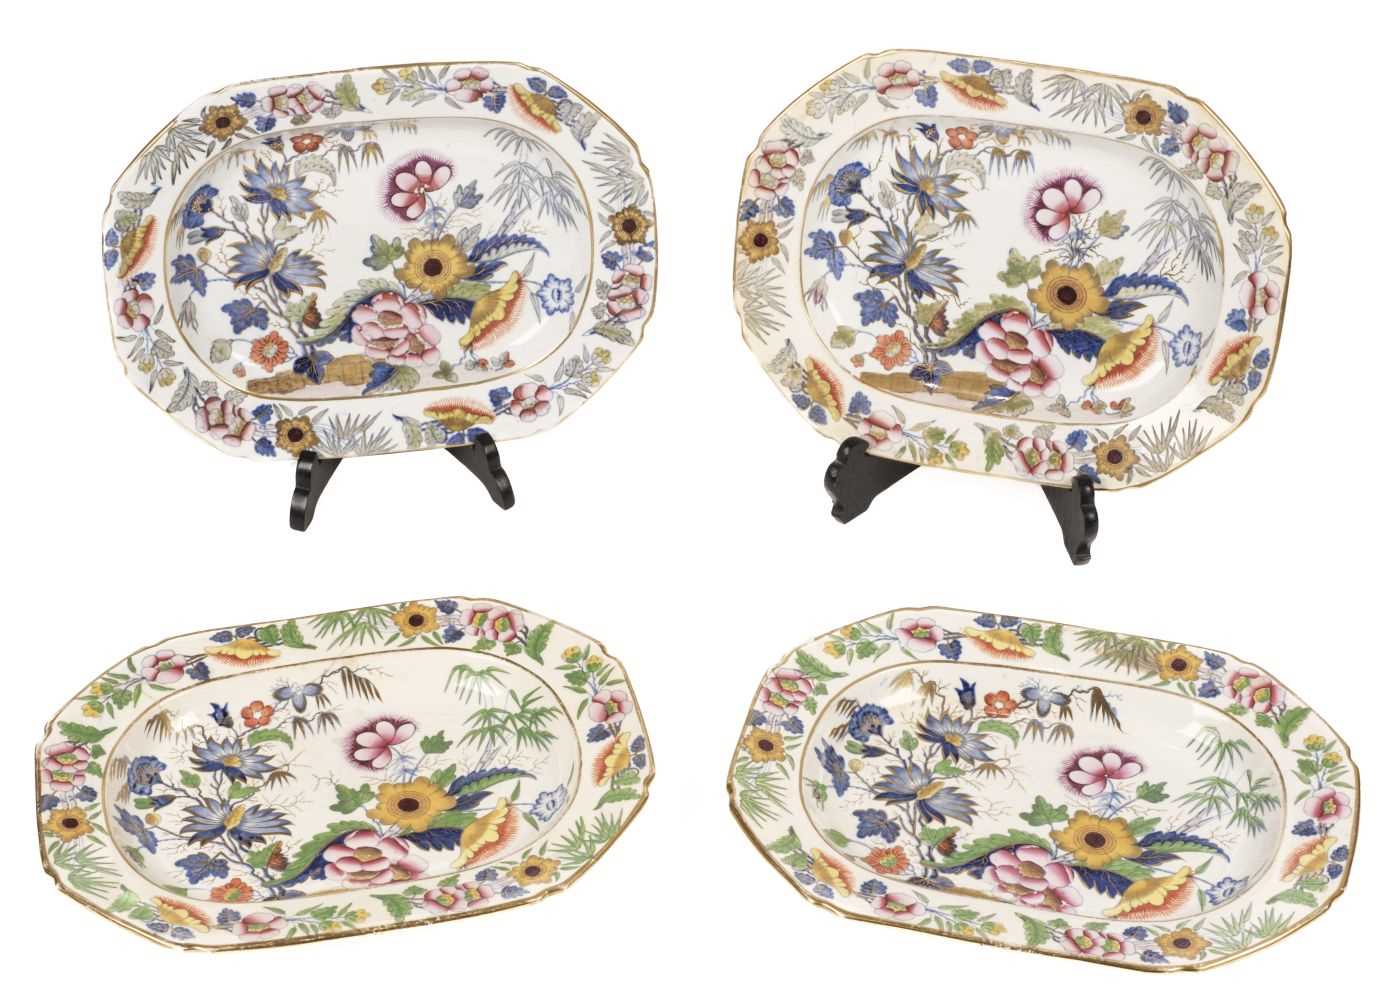 Lot 71 - Ironstone China. A set of four ironstone porcelain 'Britannicus Dresden China' meat dishes